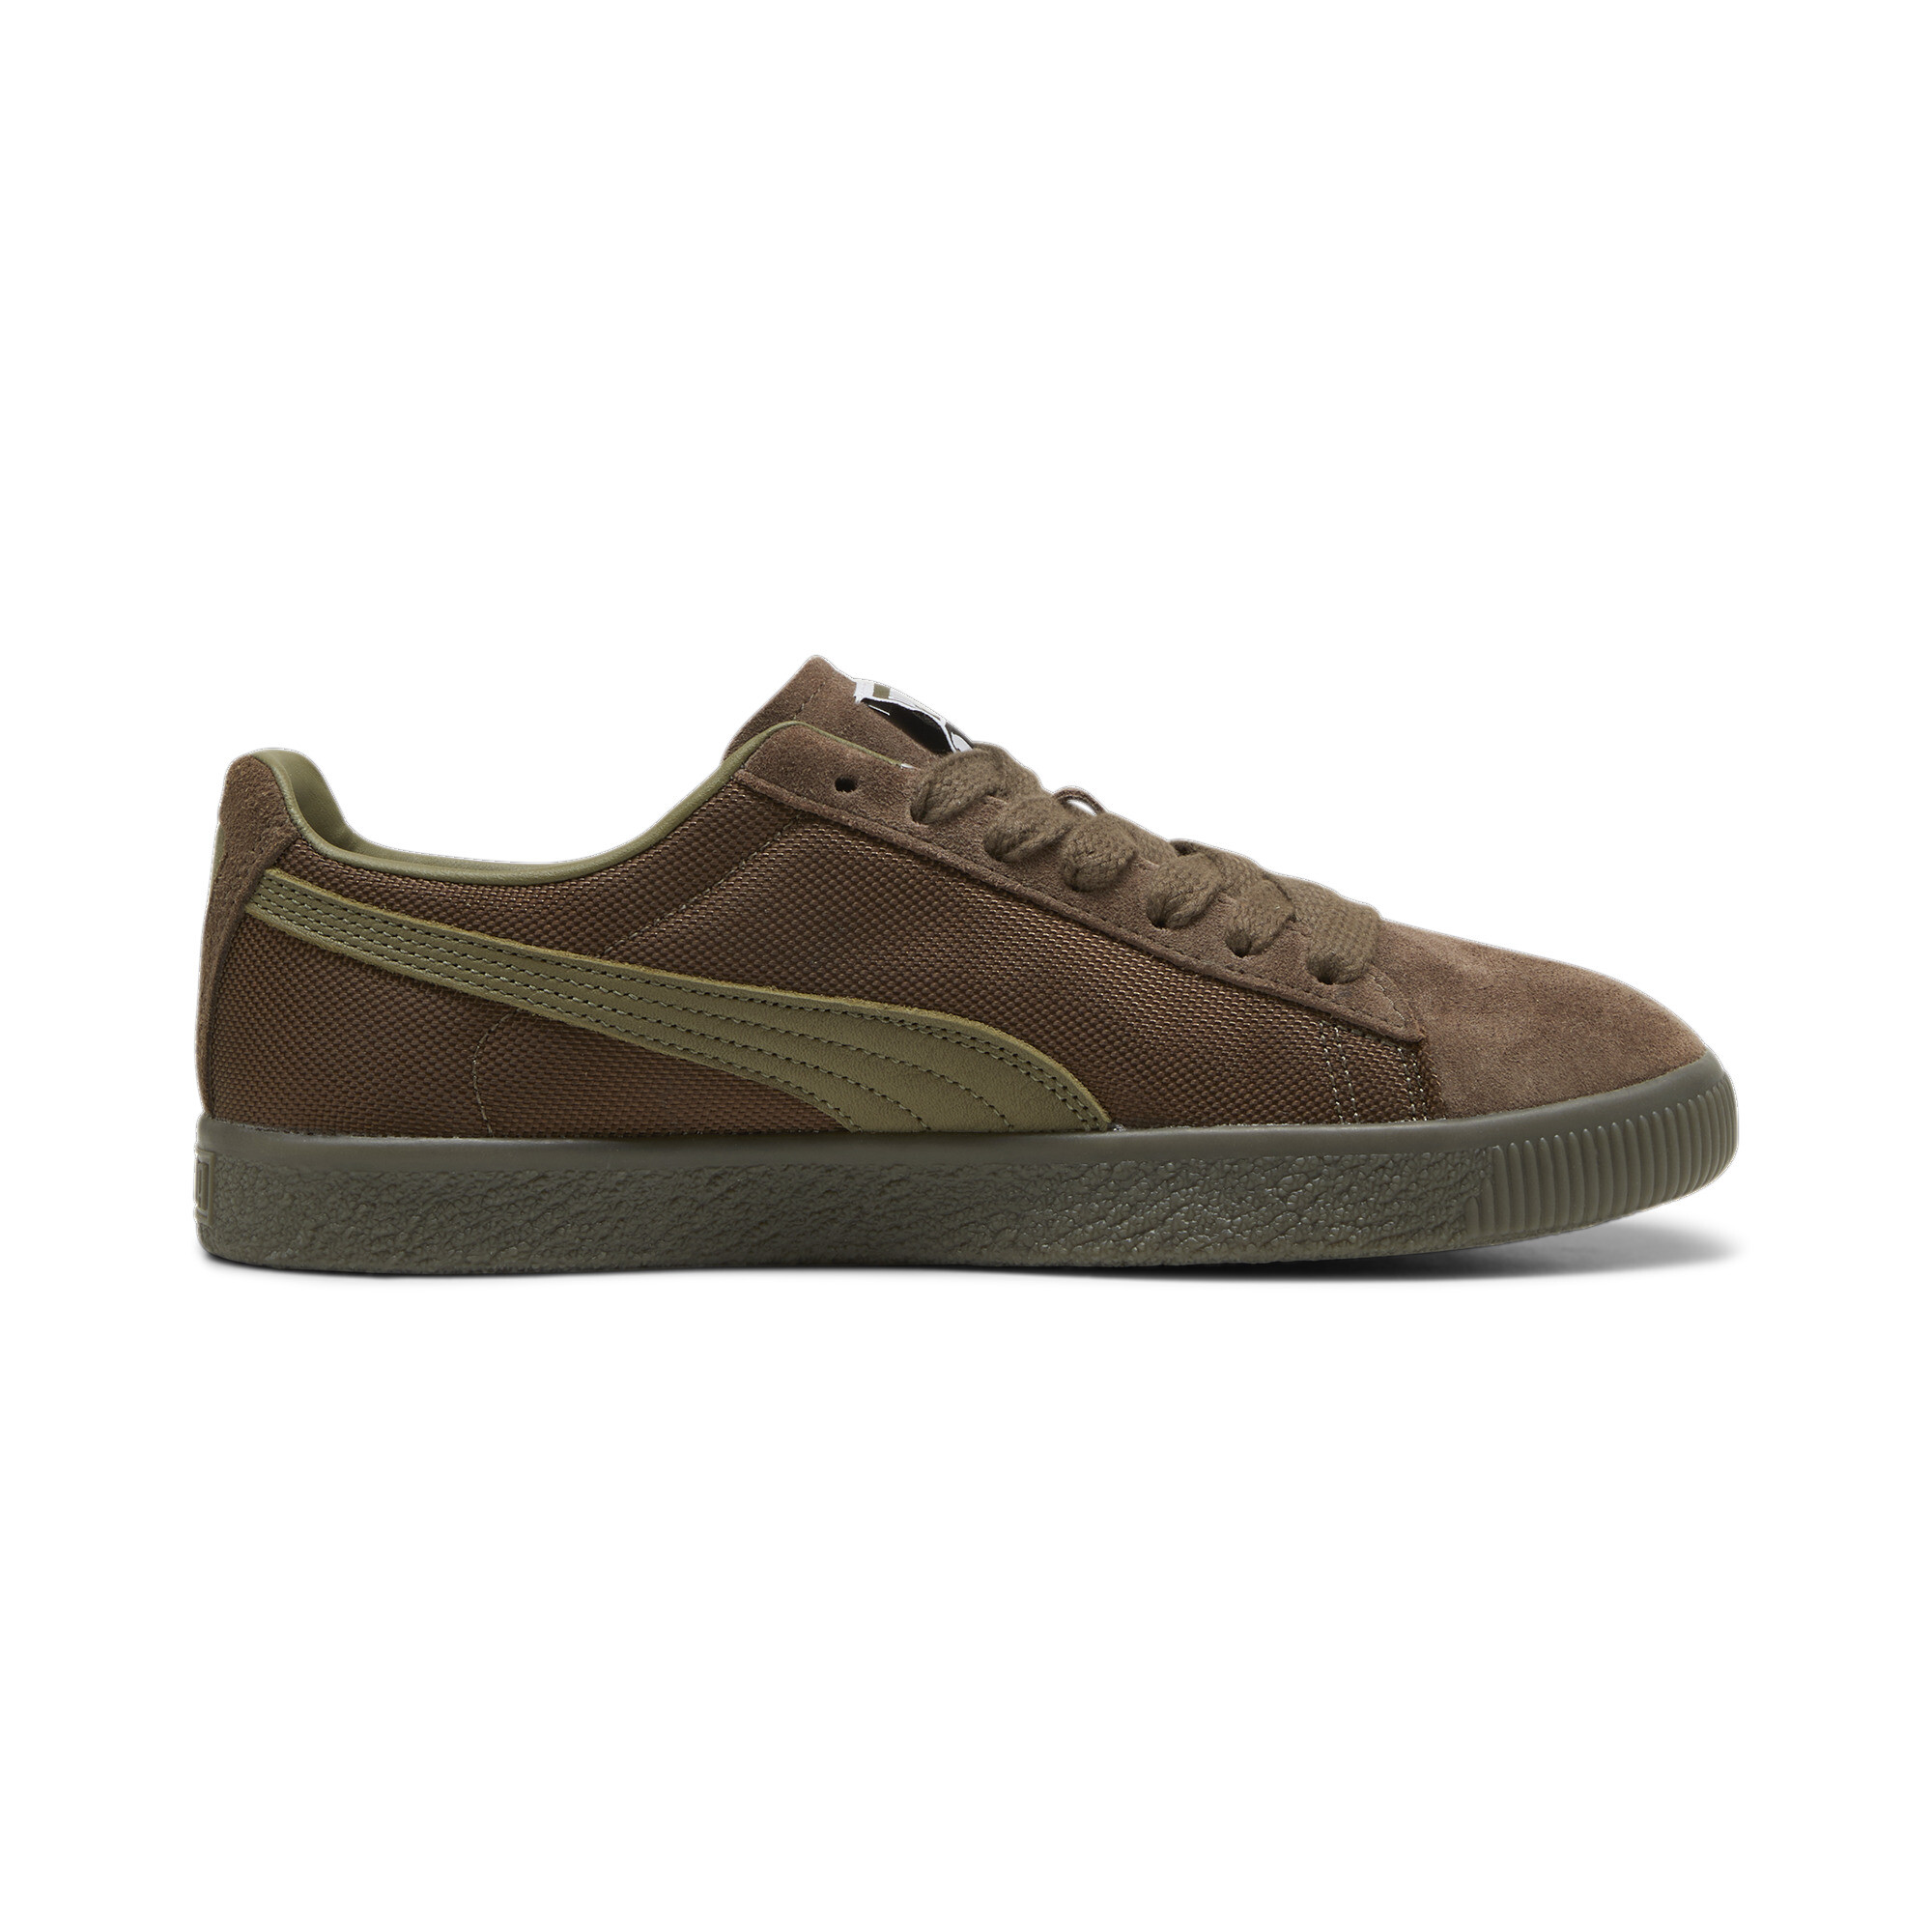 Puma Clyde Soph Sneakers, Brown, Size 46, Shoes